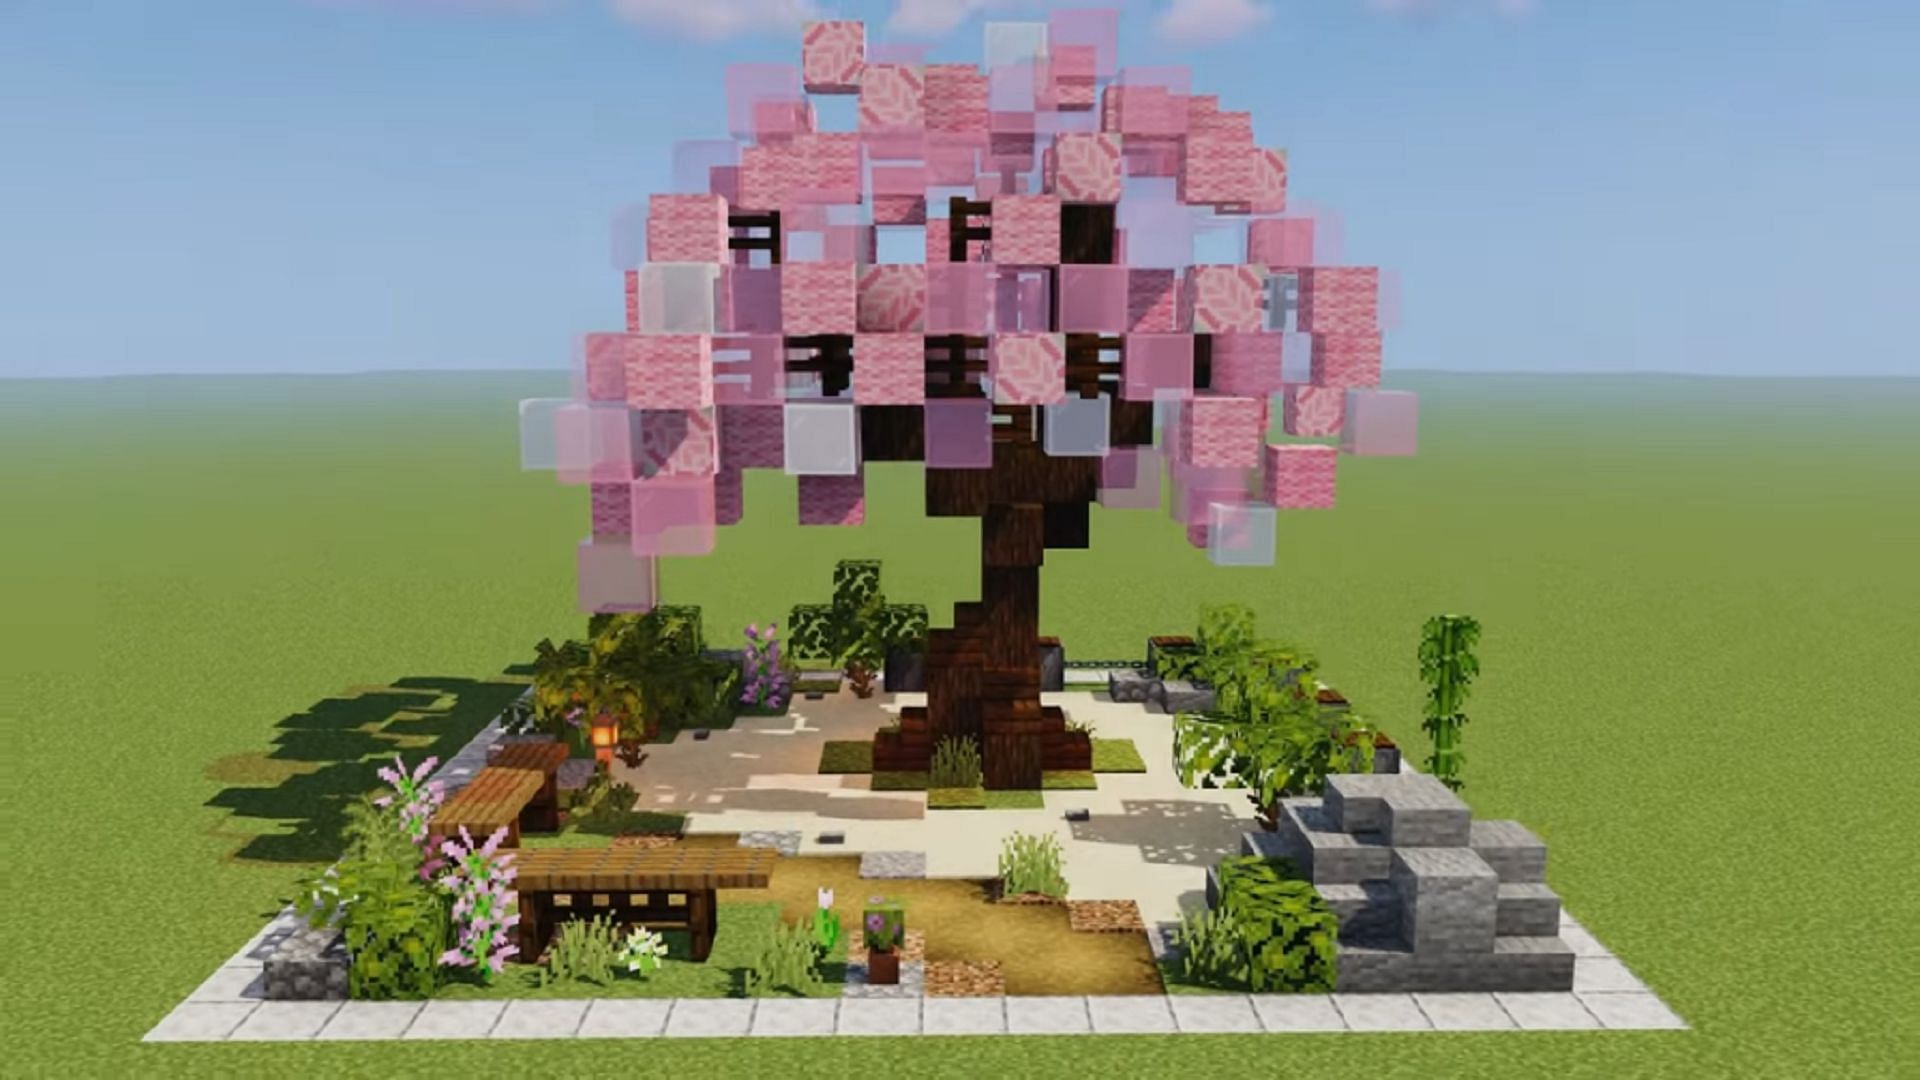 Seasonal trees can look gorgeous with the right colored blocks in the mix (Image via Cortezerino/YouTube)